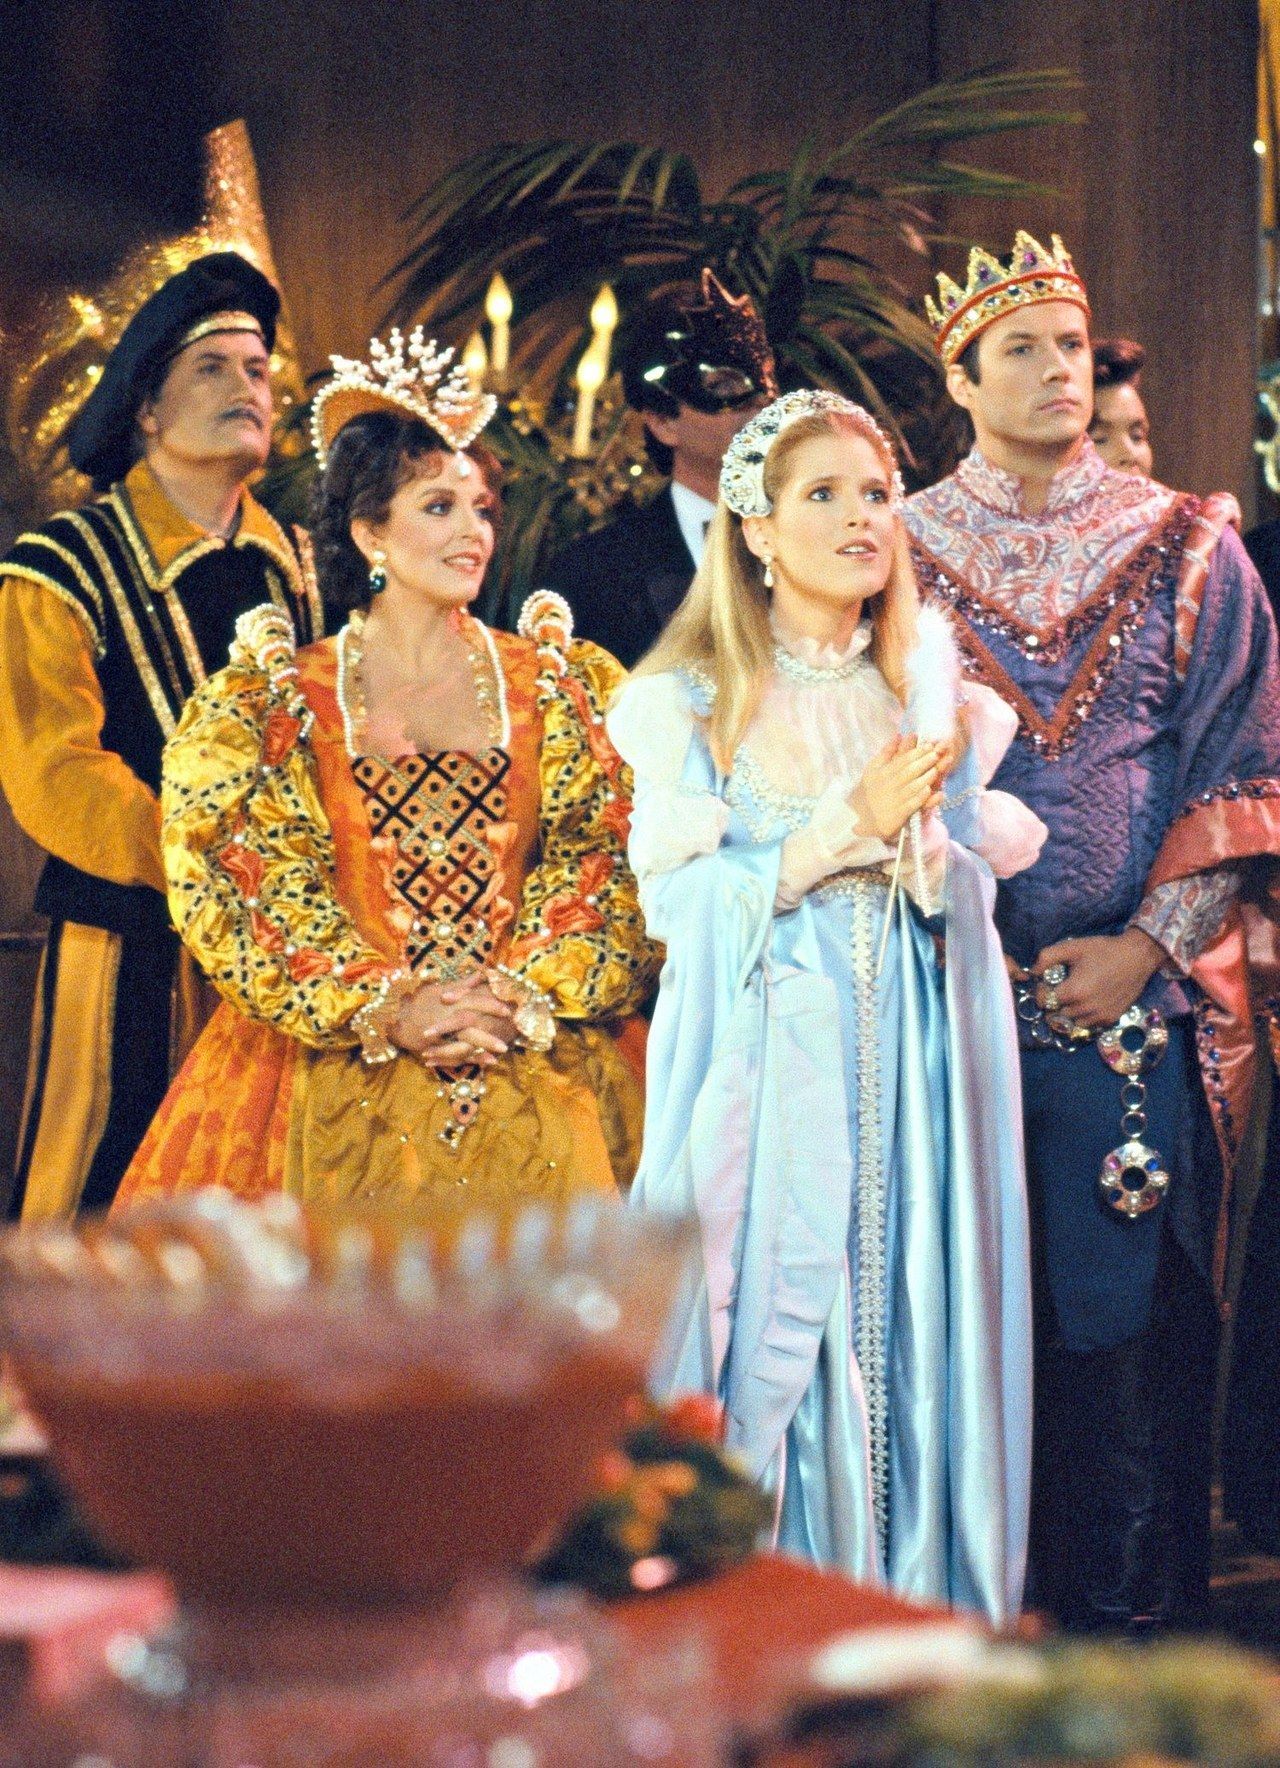 John aniston susan seaforth hayes melissa reeves matthew ashford days of our lives costumes